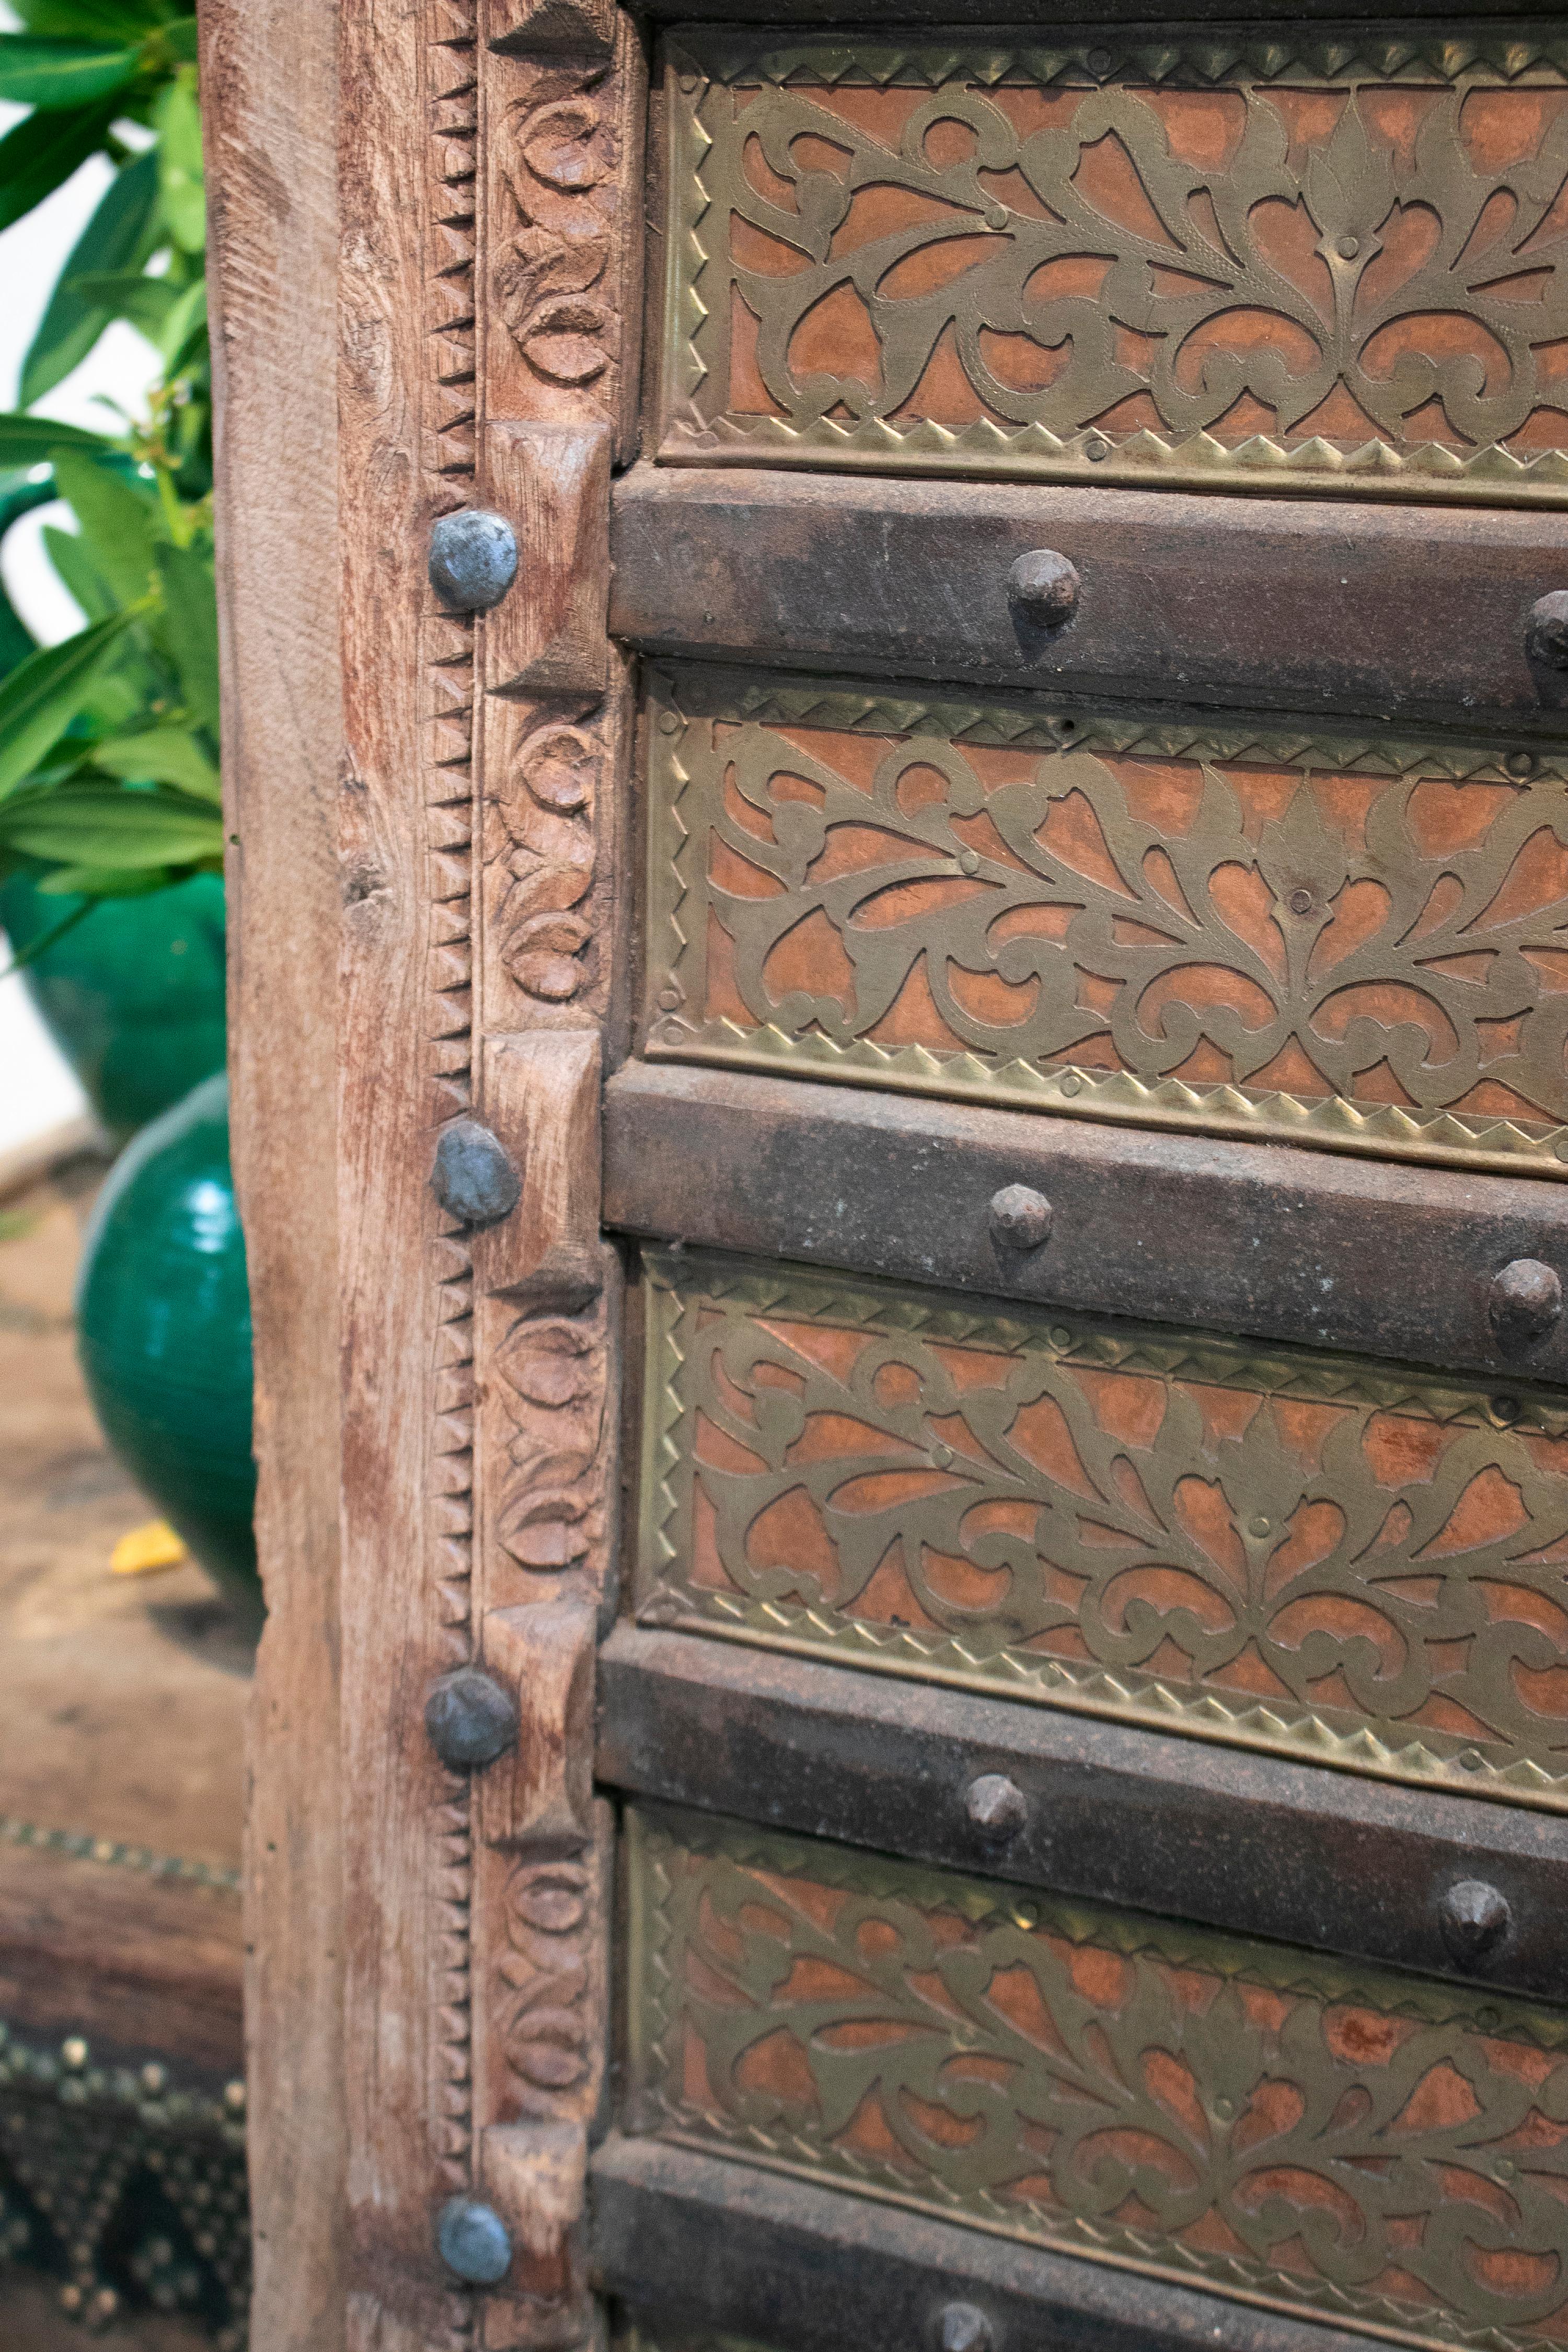 20th Century 1920s Indian Wooden Door Profusely Decorated with Ornamental Bronze and Iron